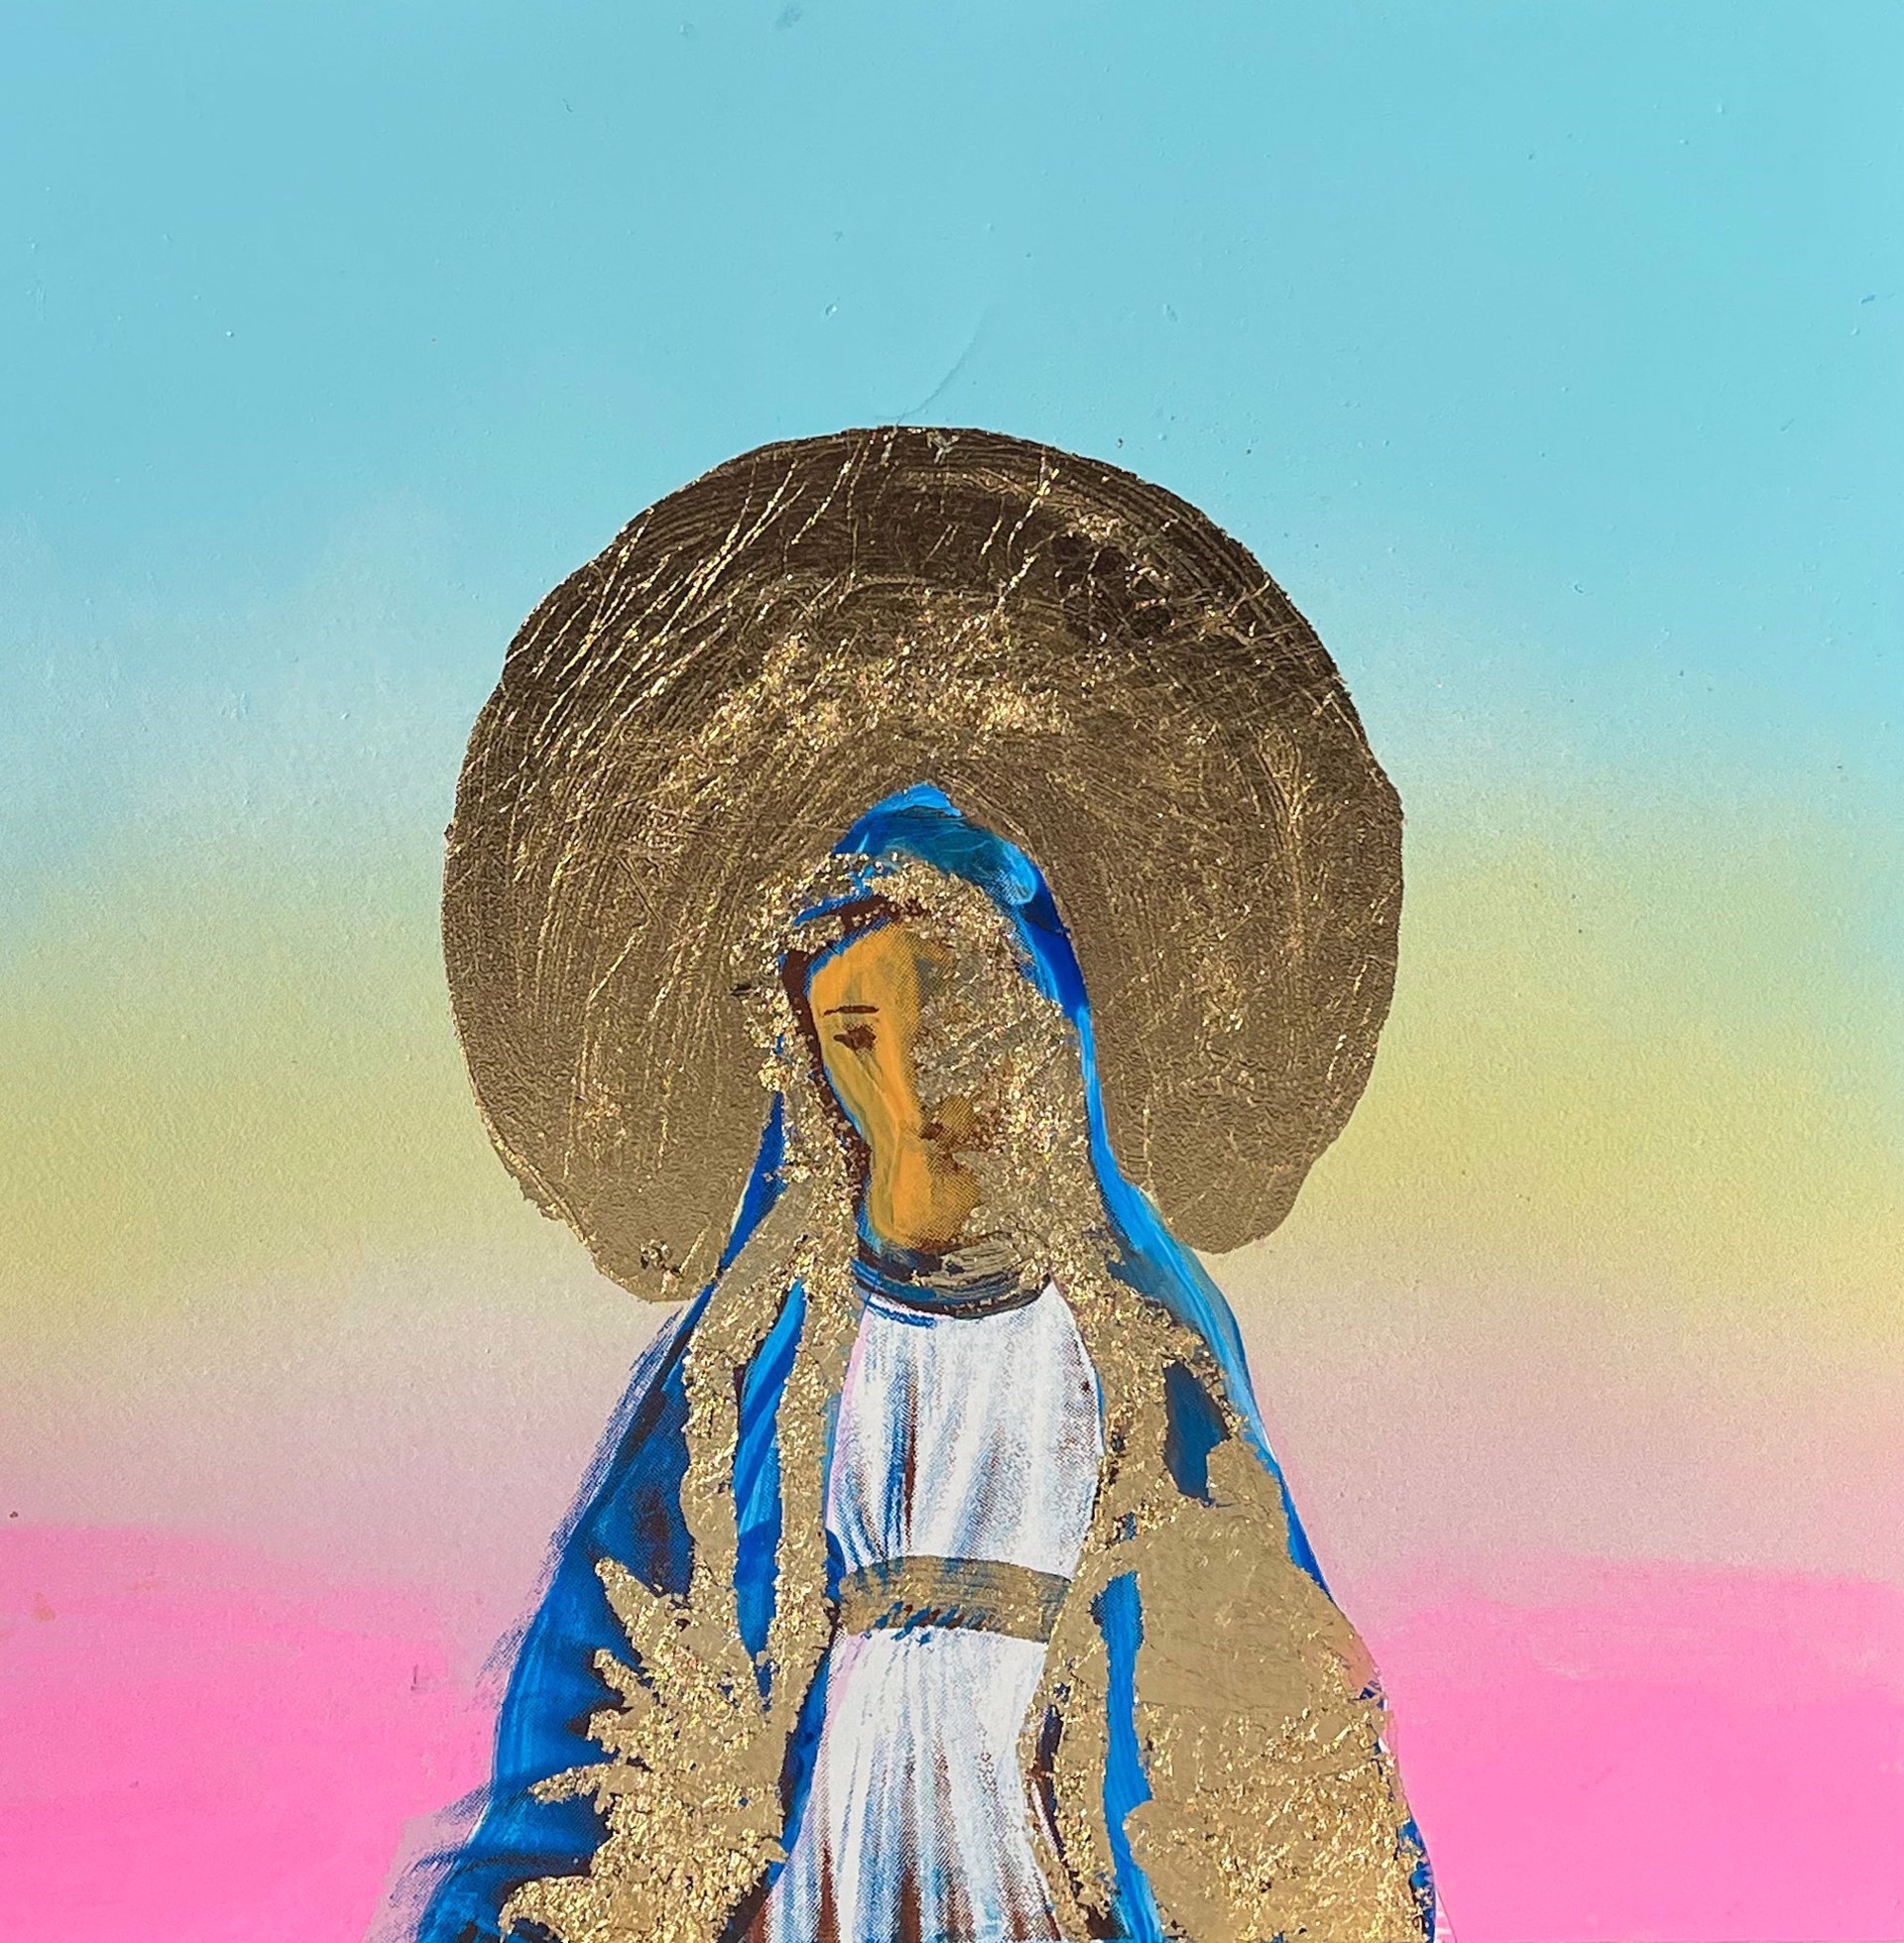 Ombre Hail Mary by Megan Coonelly